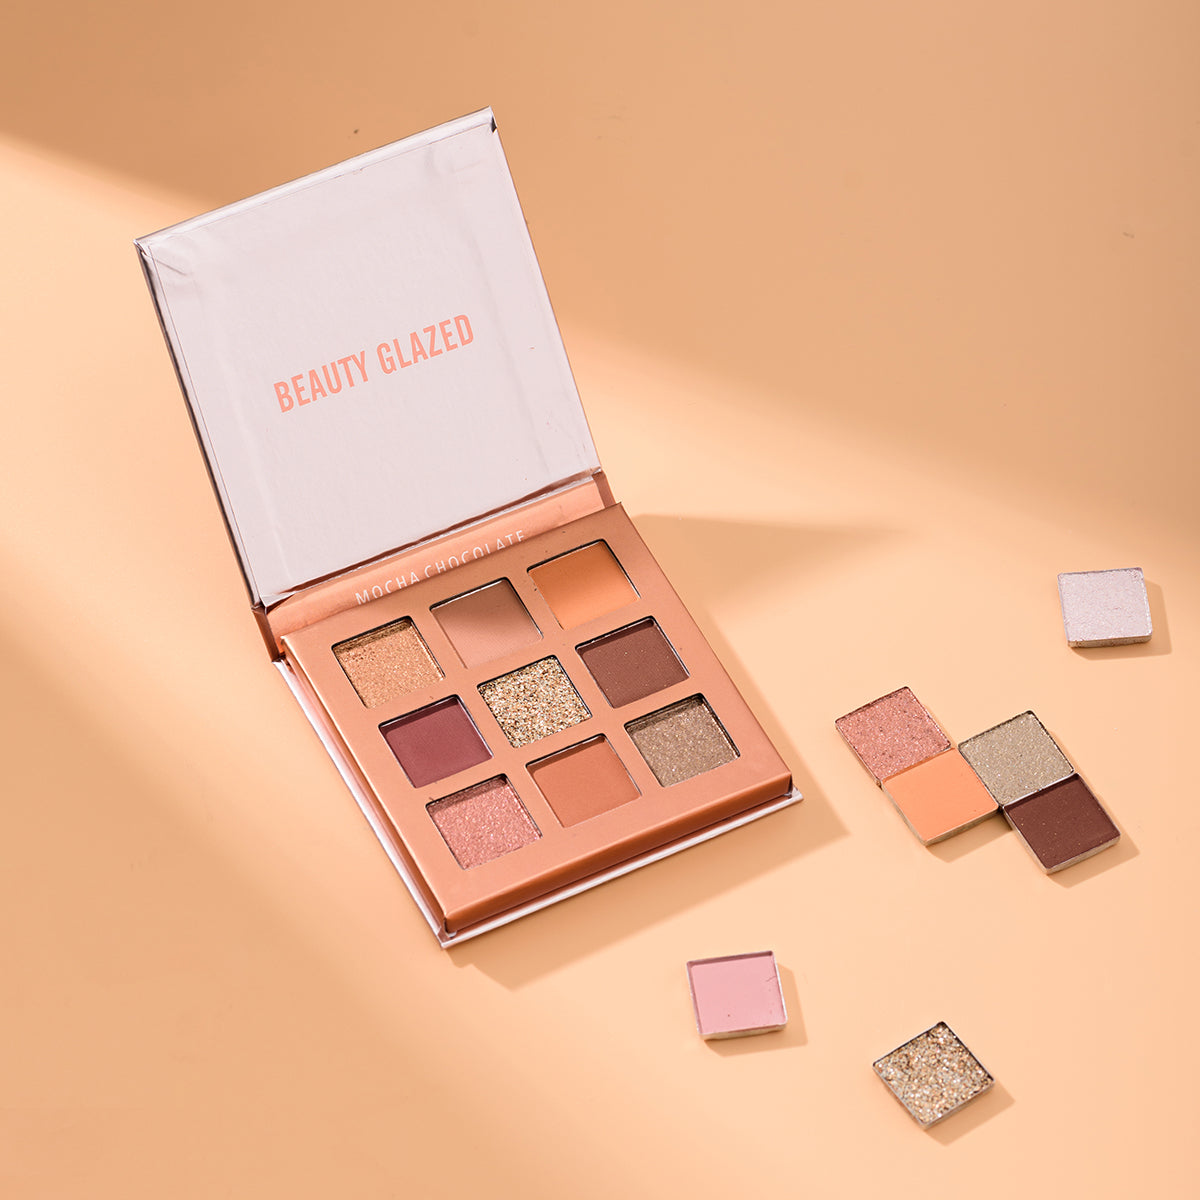 Selling the Sunset Palette